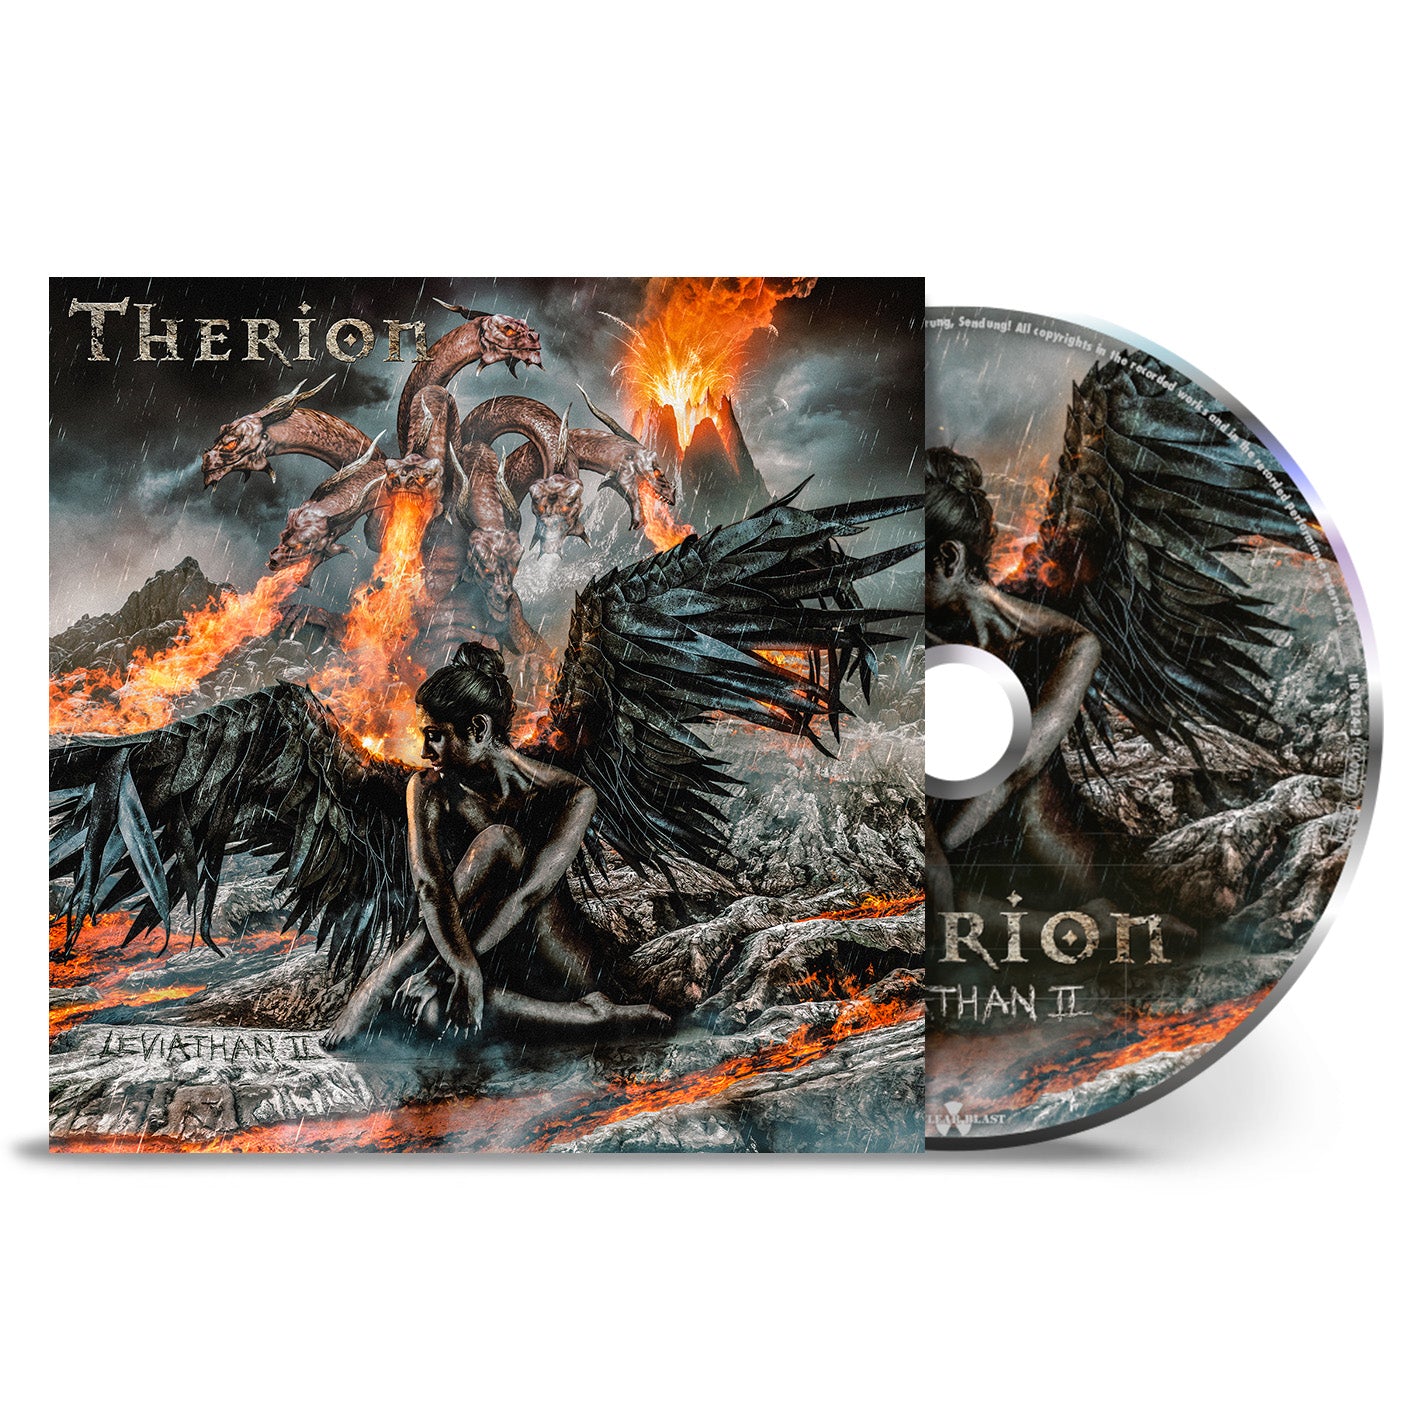 Therion "Leviathan II" Jewelcase CD